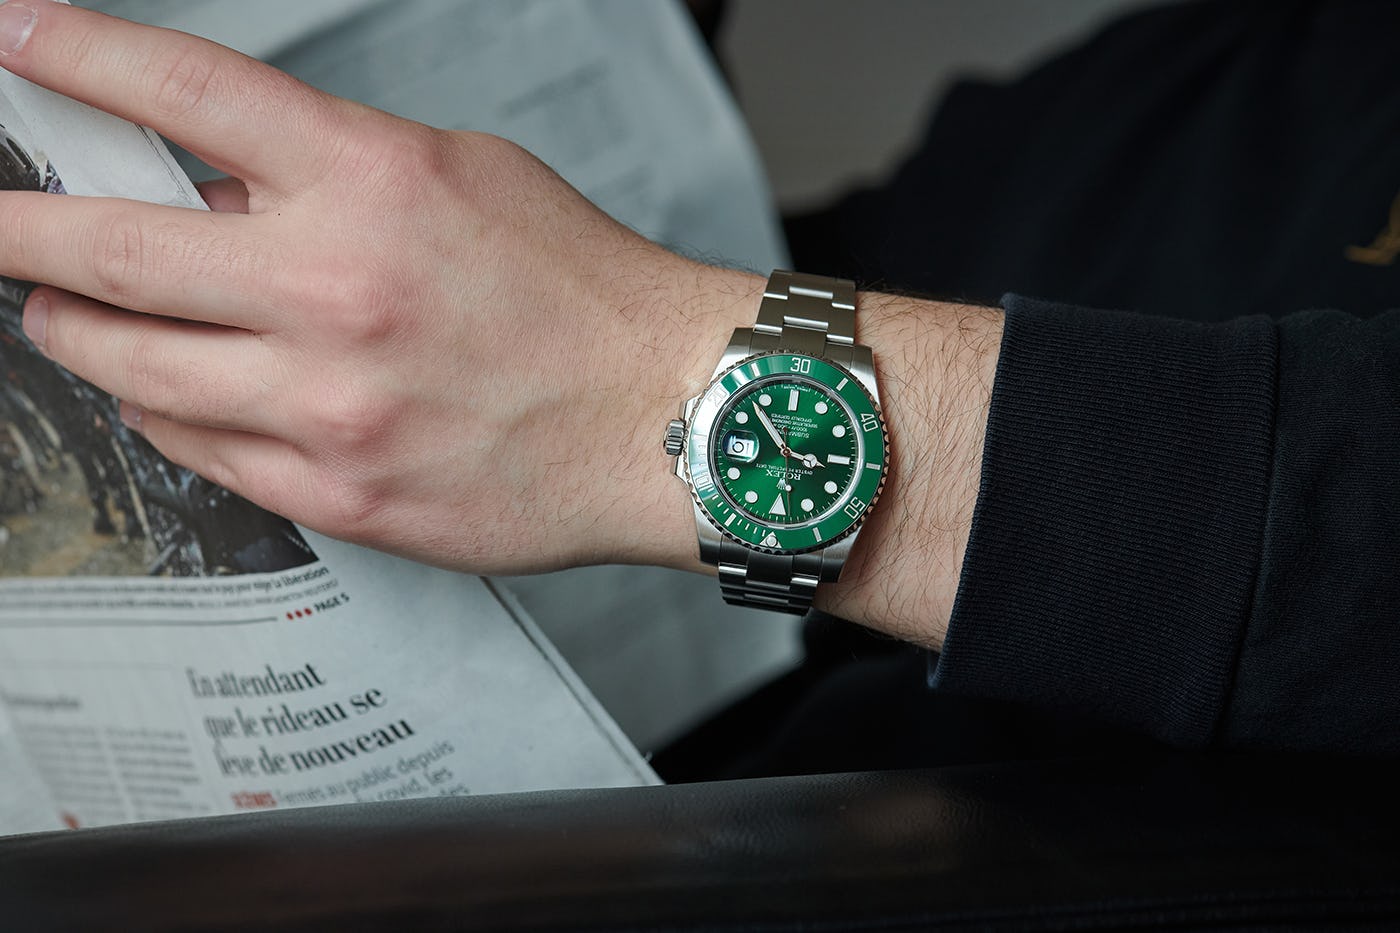 A Closer Look At The Rolex Hulk Submariner 116610LV - The Watch Company